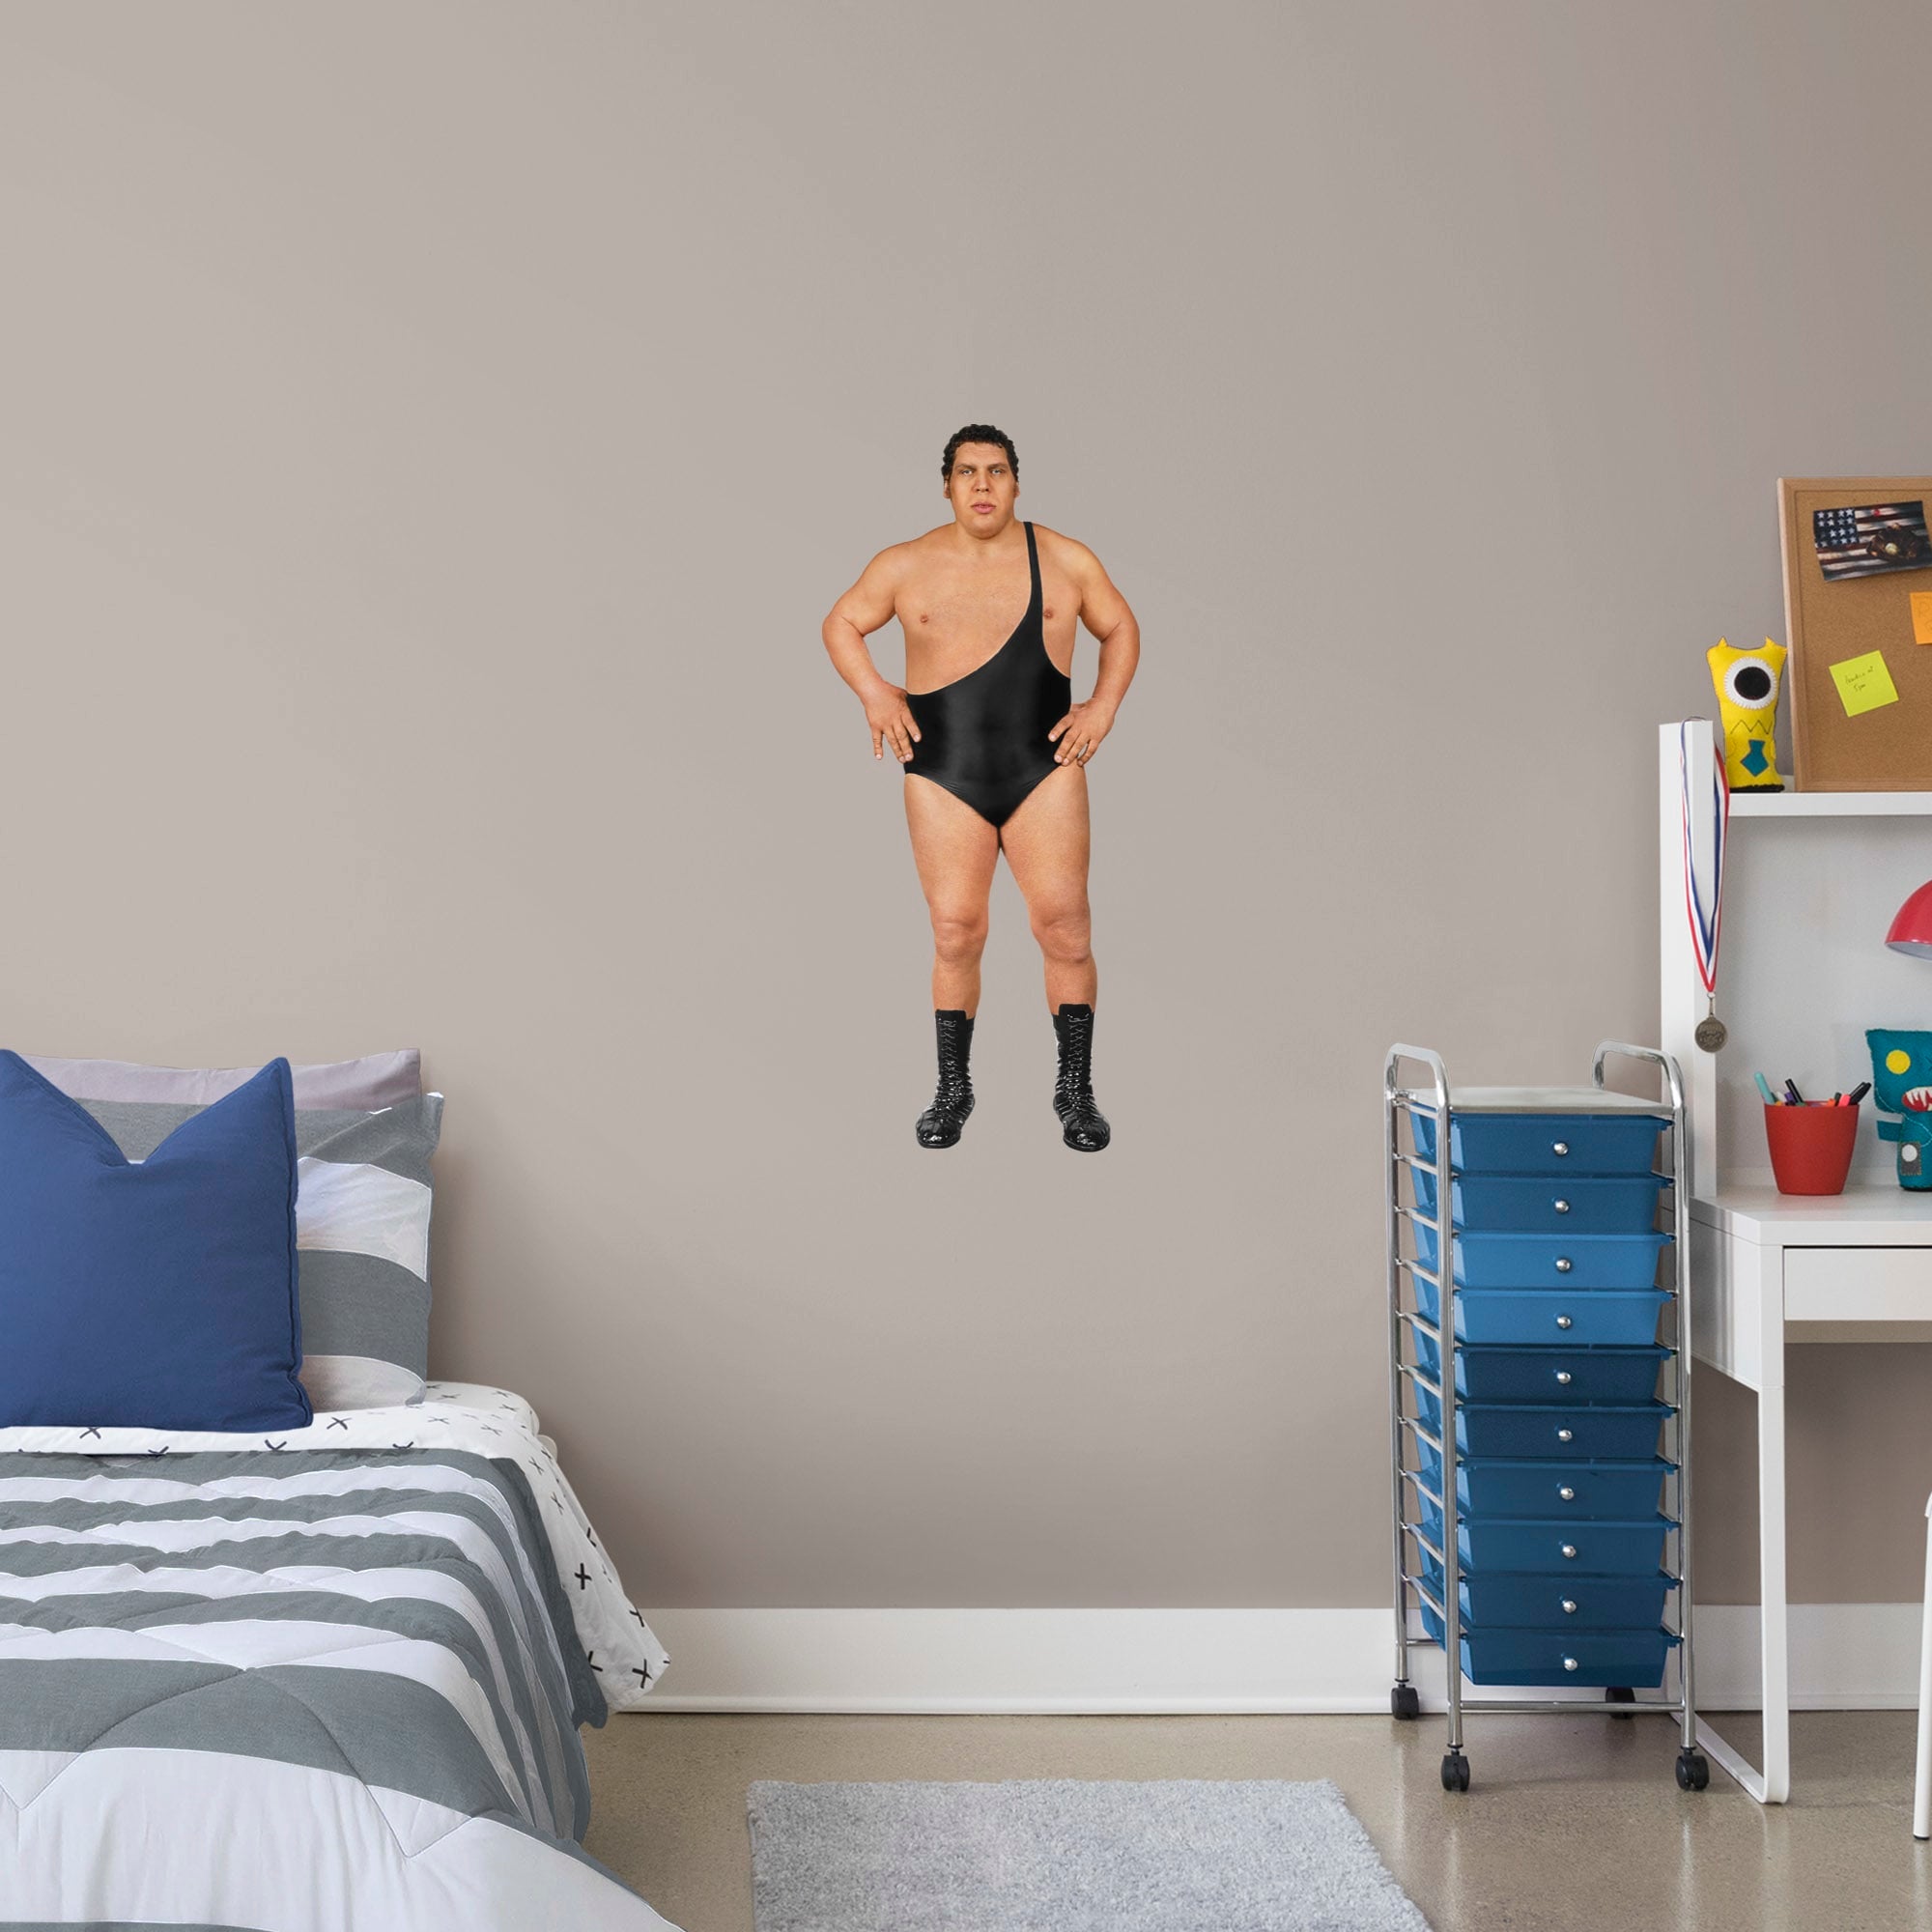 Andre The Giant for WWE - Officially Licensed Removable Wall Decal Large by Fathead | Vinyl